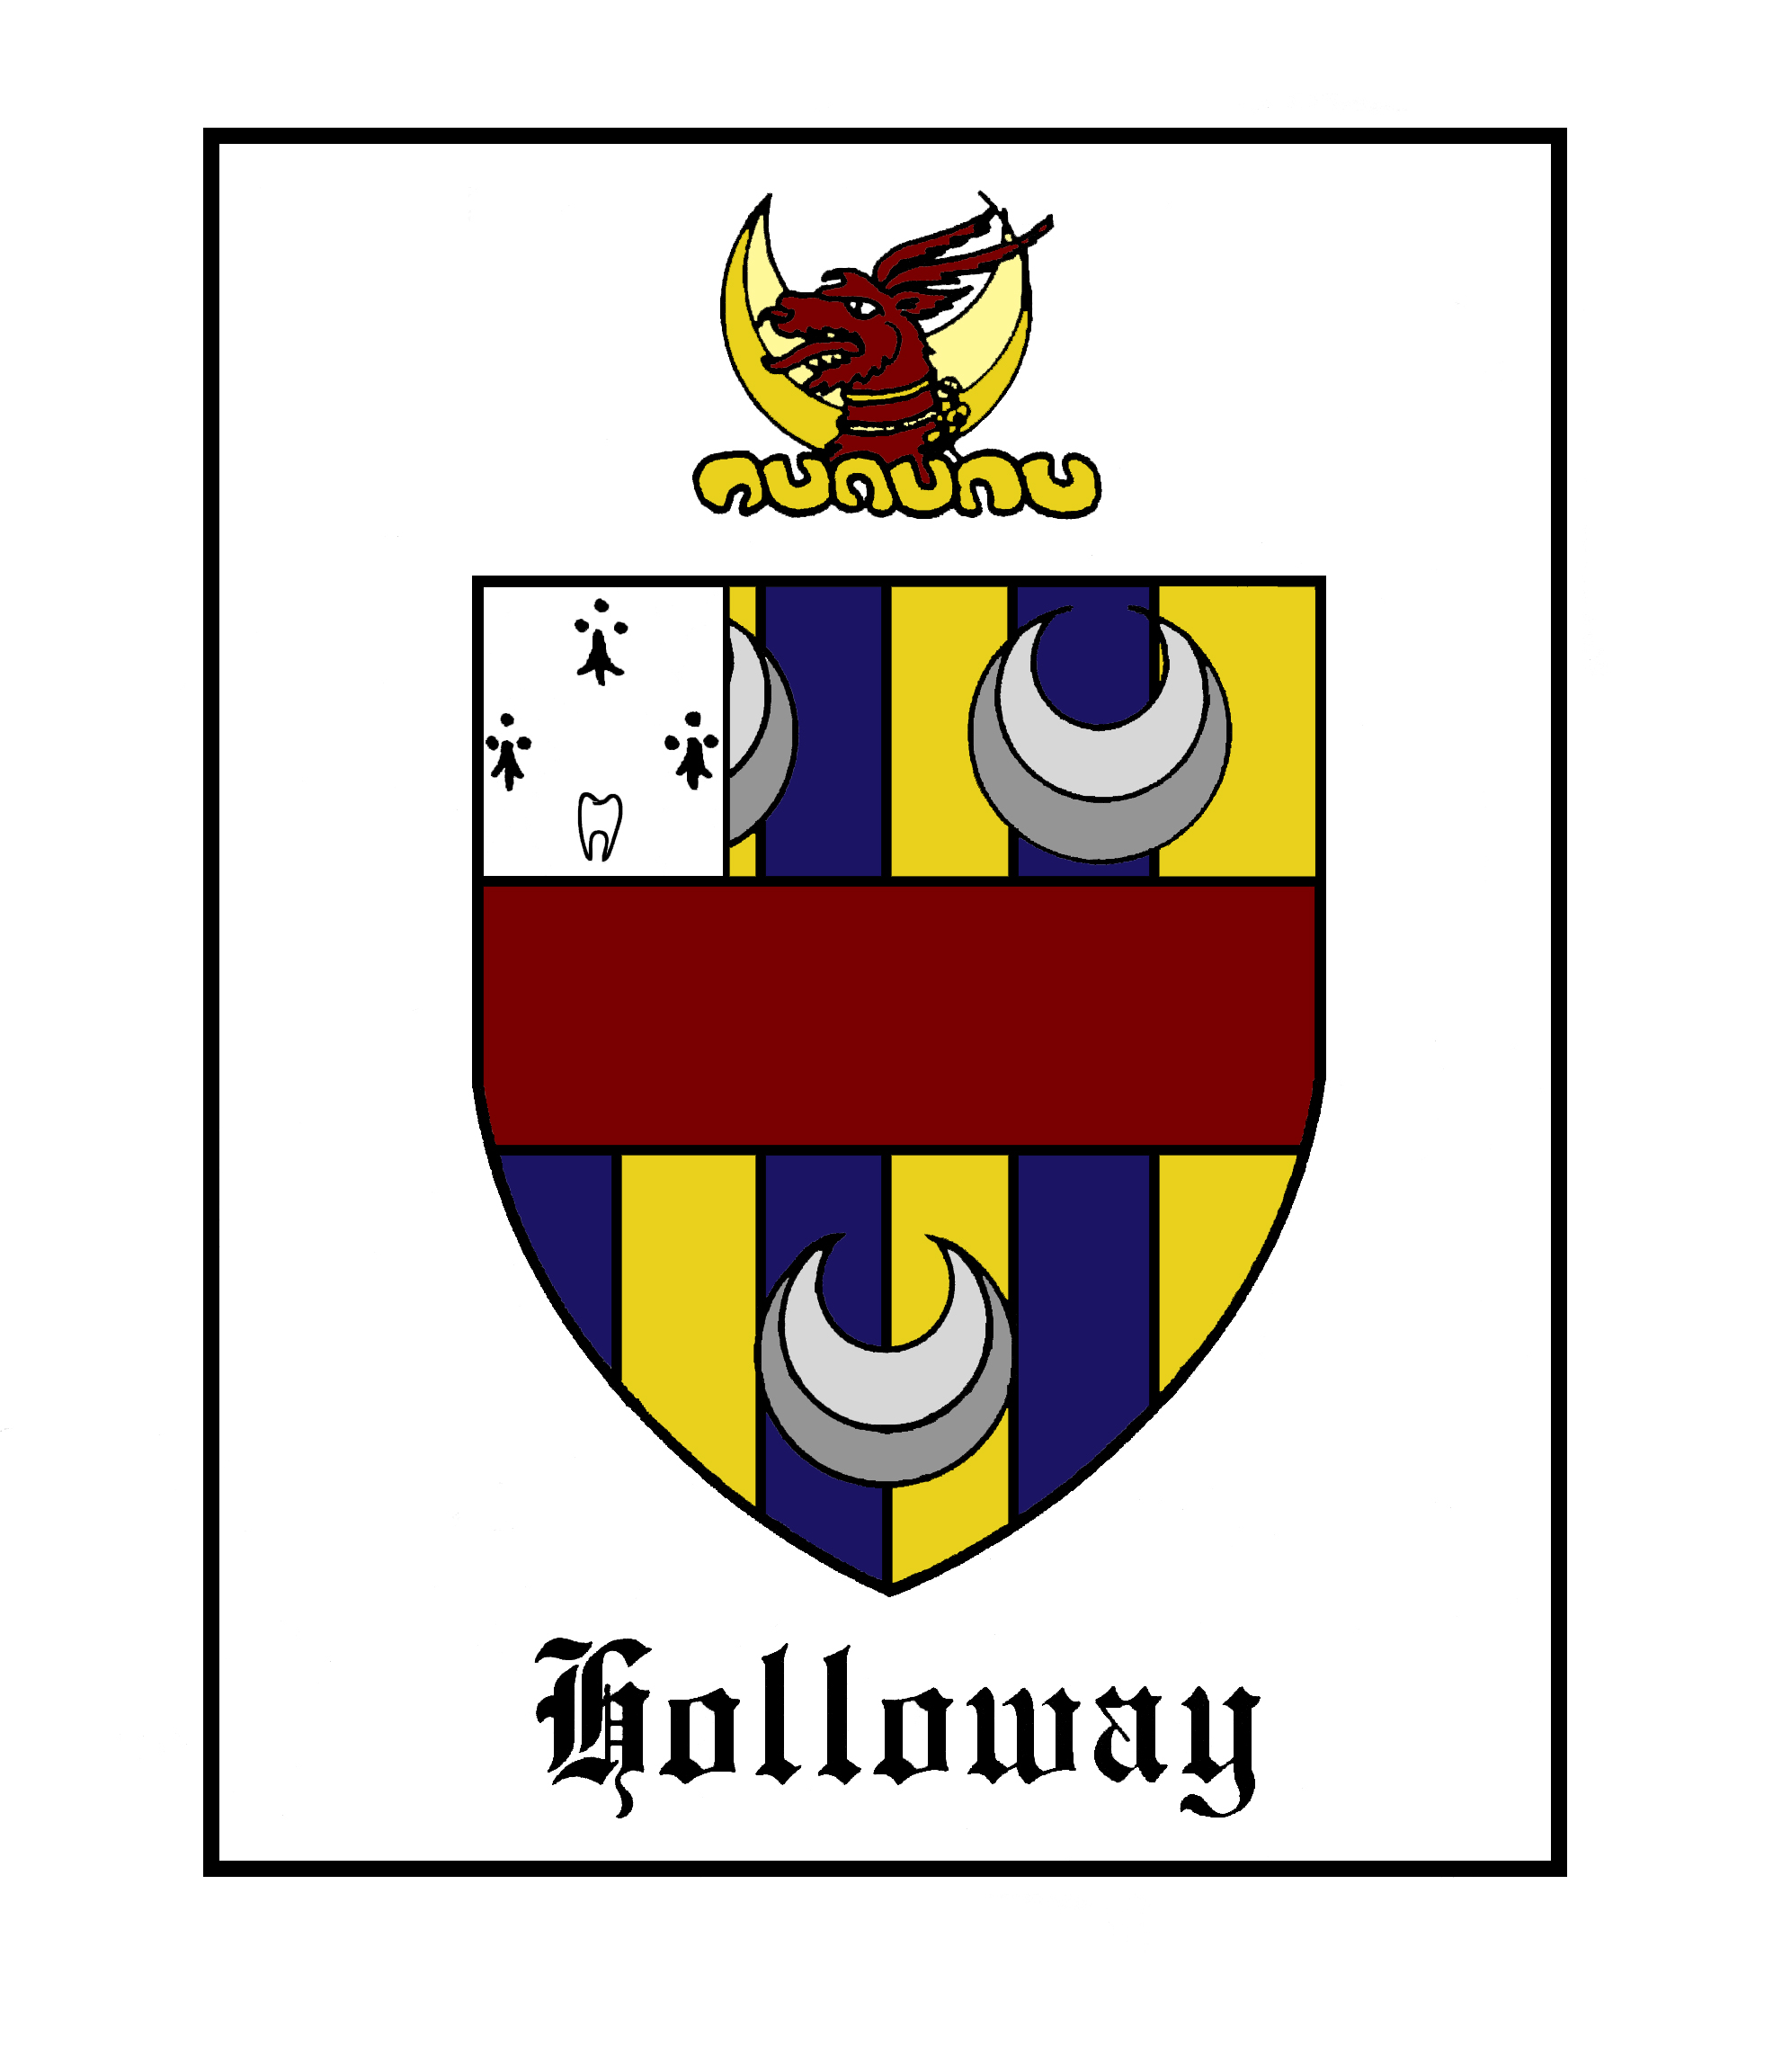 Holloway Coat of Arms